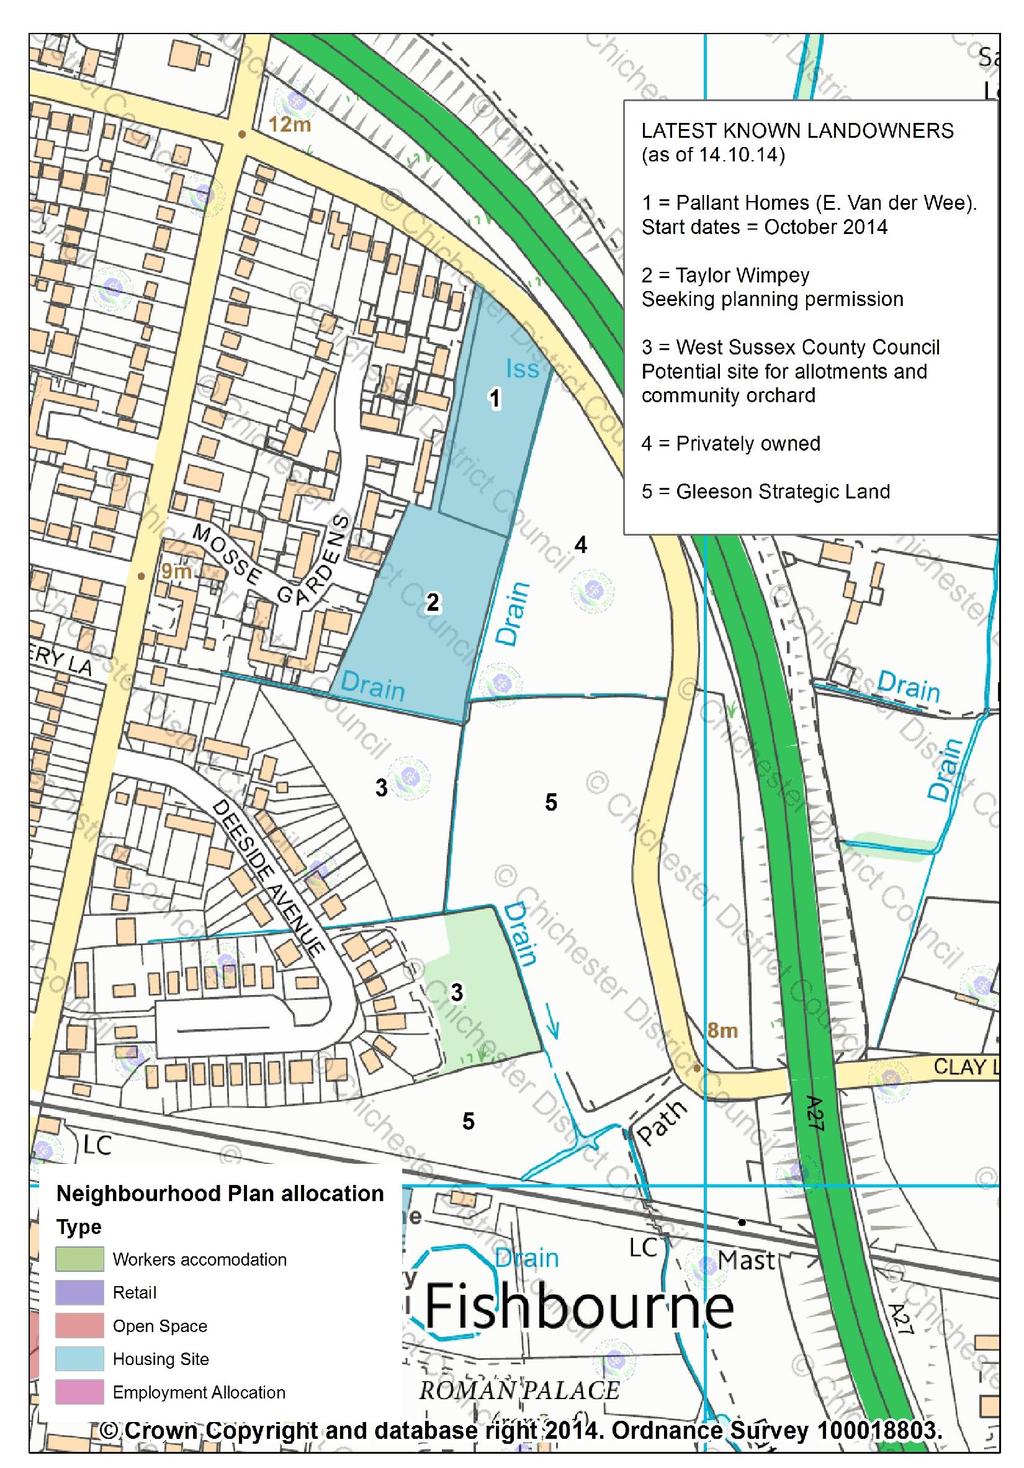 which is designed to run down to the A27, with a temporary access from Clay Lane).